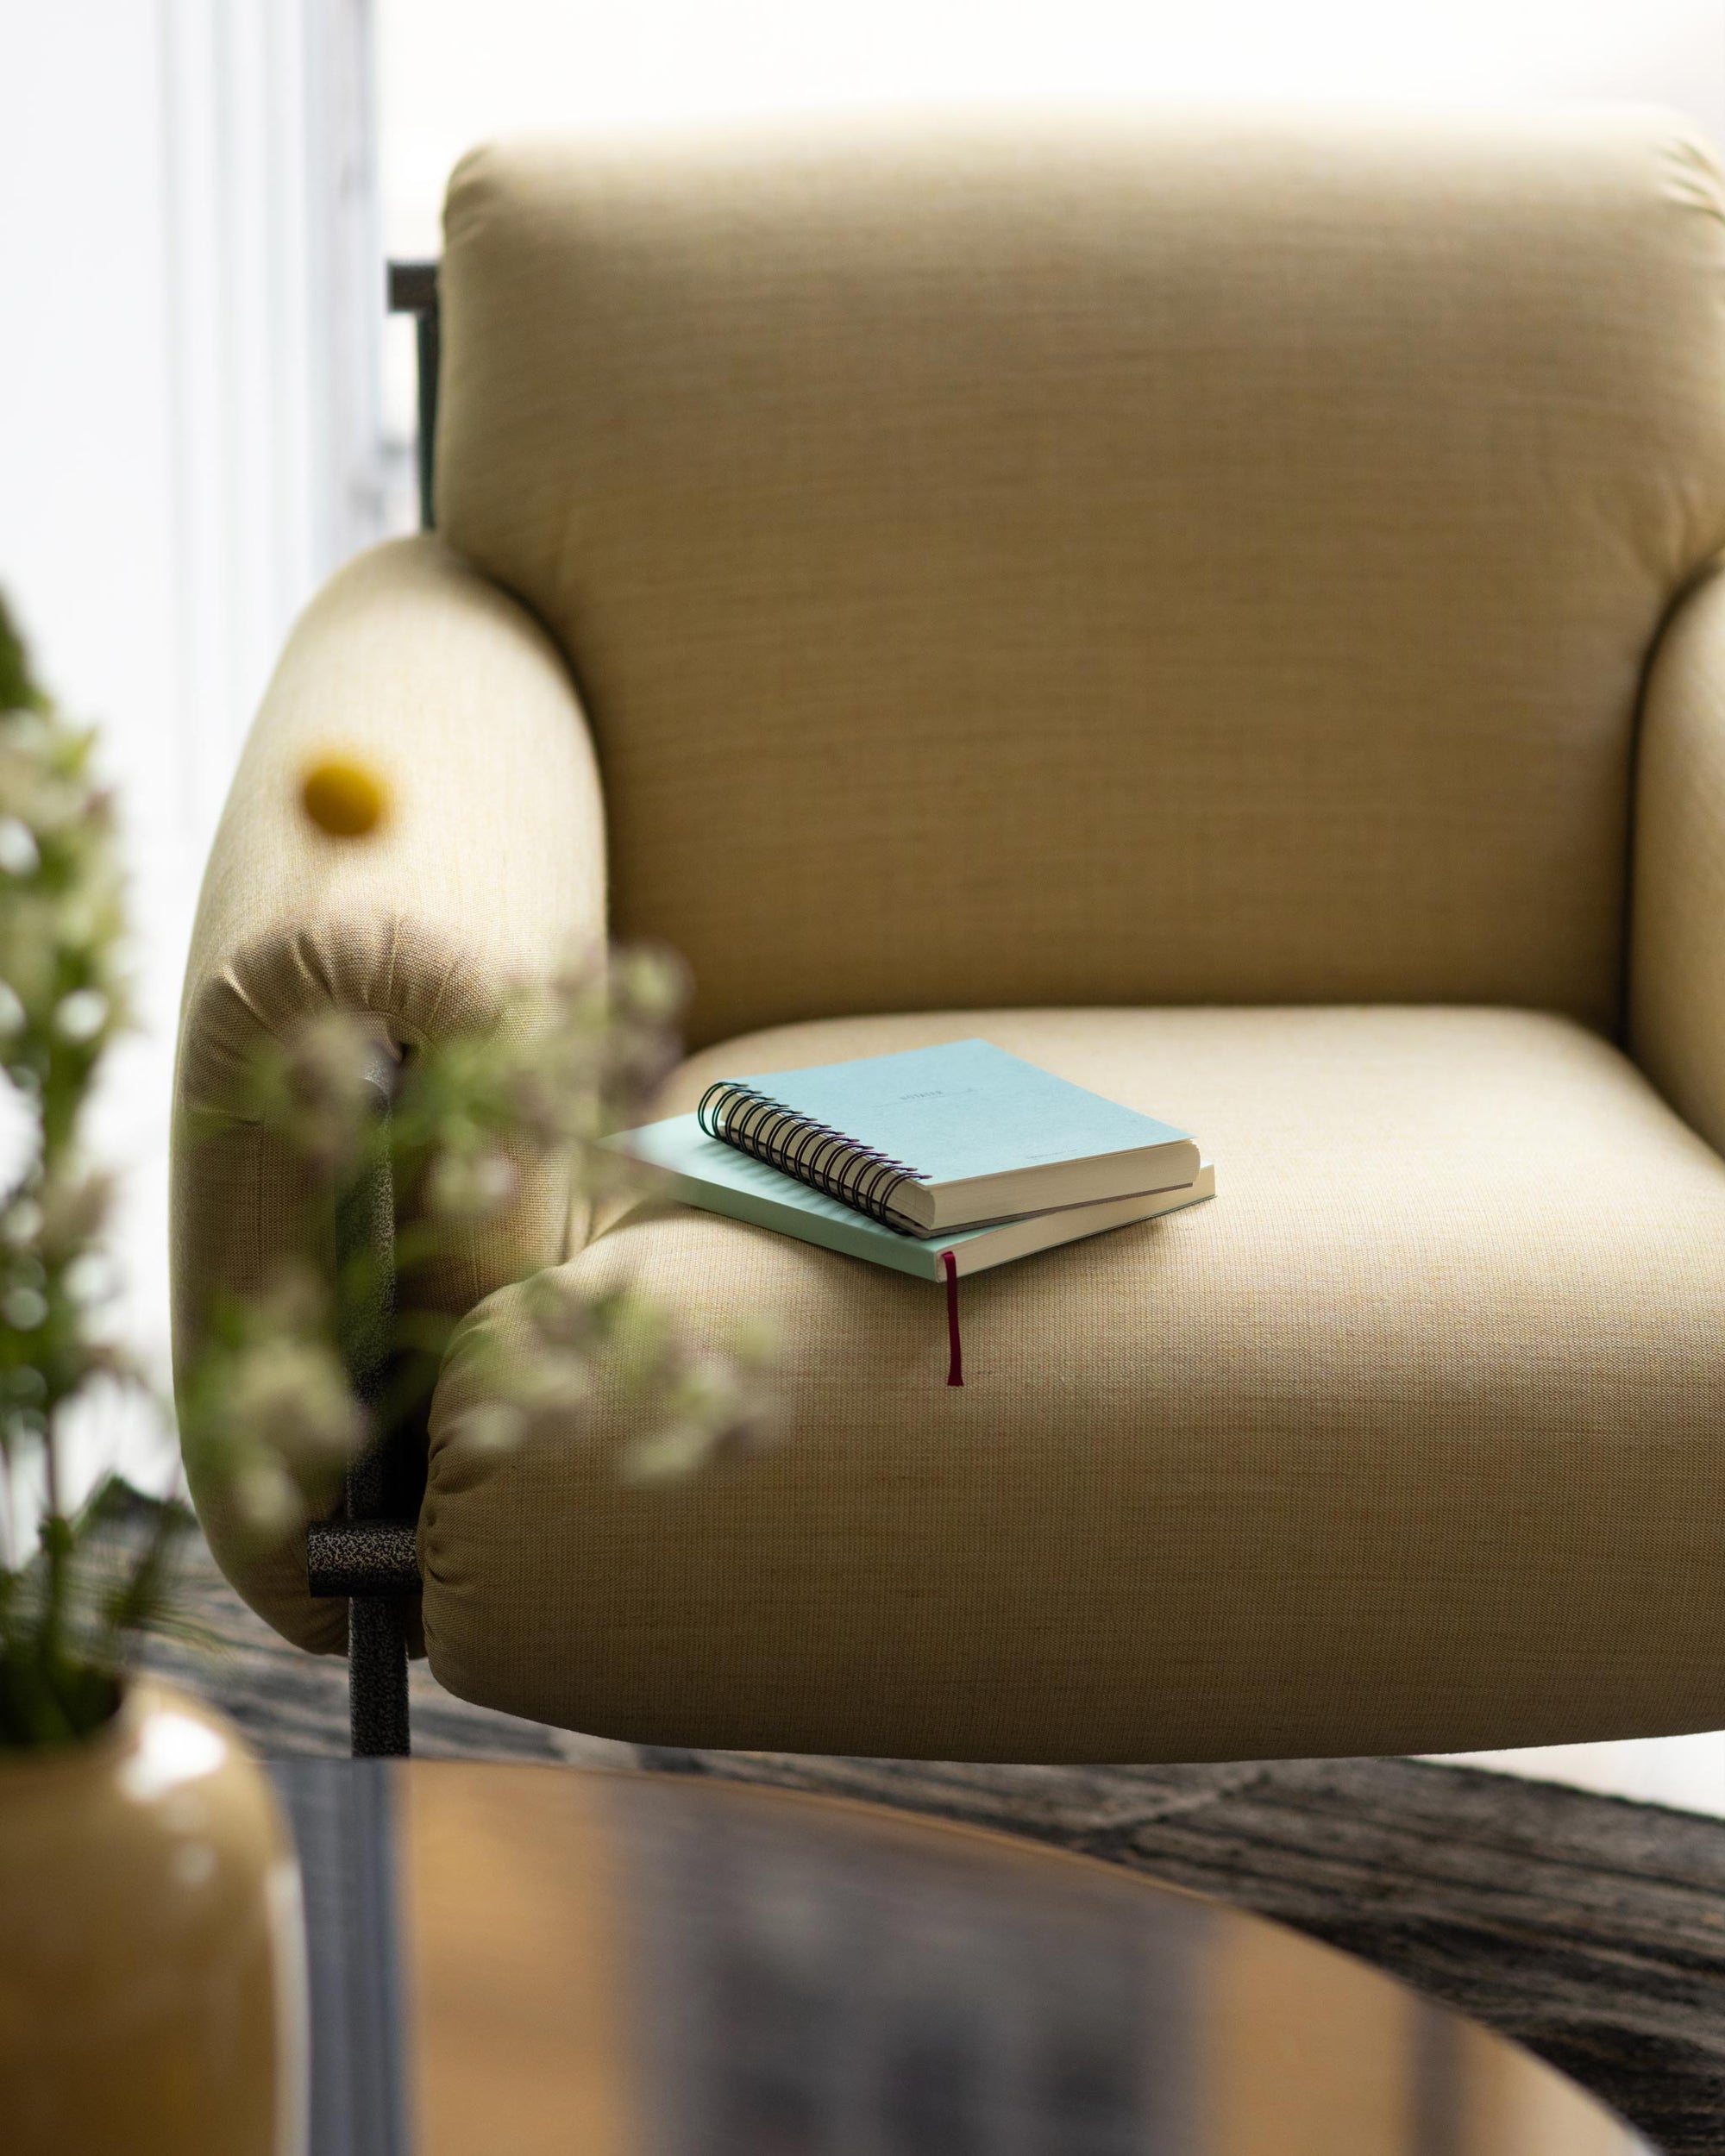 Comfortable chaire with a small stack of notebooks